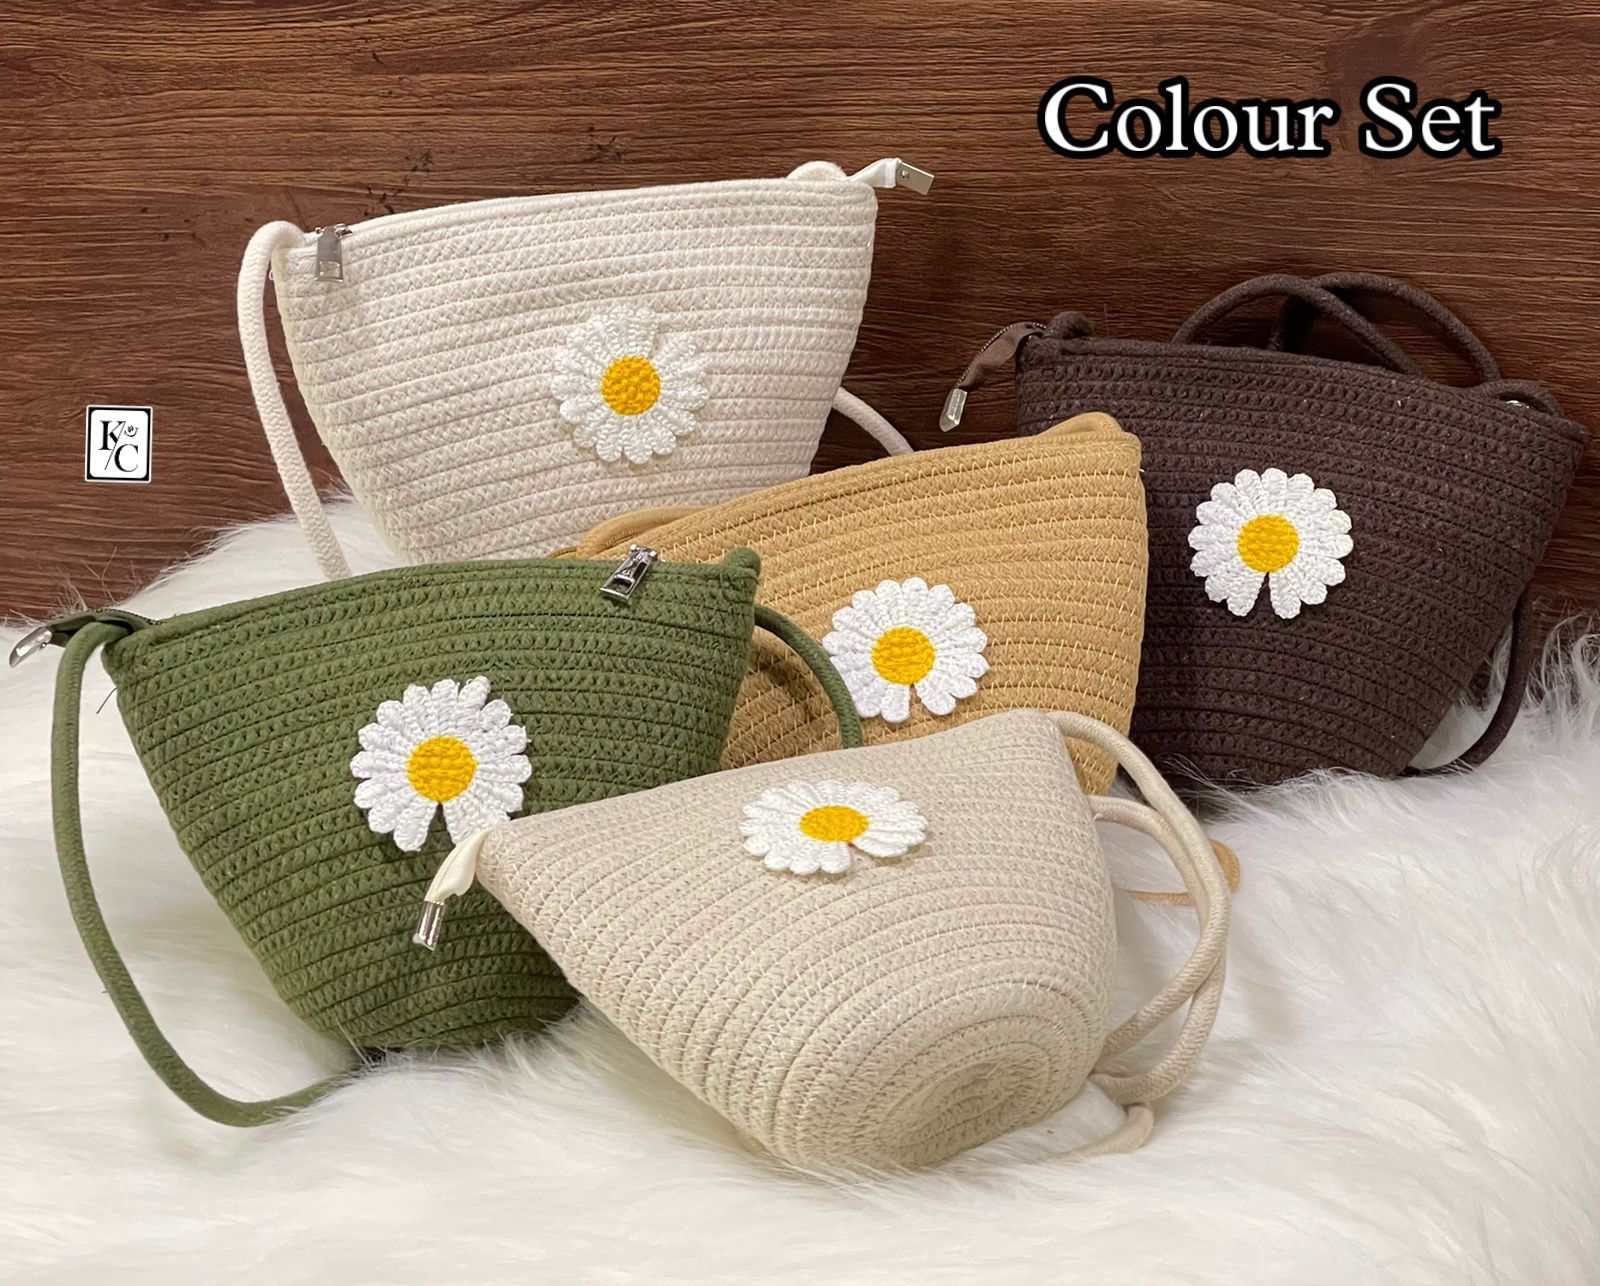 Daisy Rose Tote Shoulder Bag and Matching Clutch for Women - PU Vegan  Leather Handbag for Travel Work and School - Cream Snake - Walmart.com